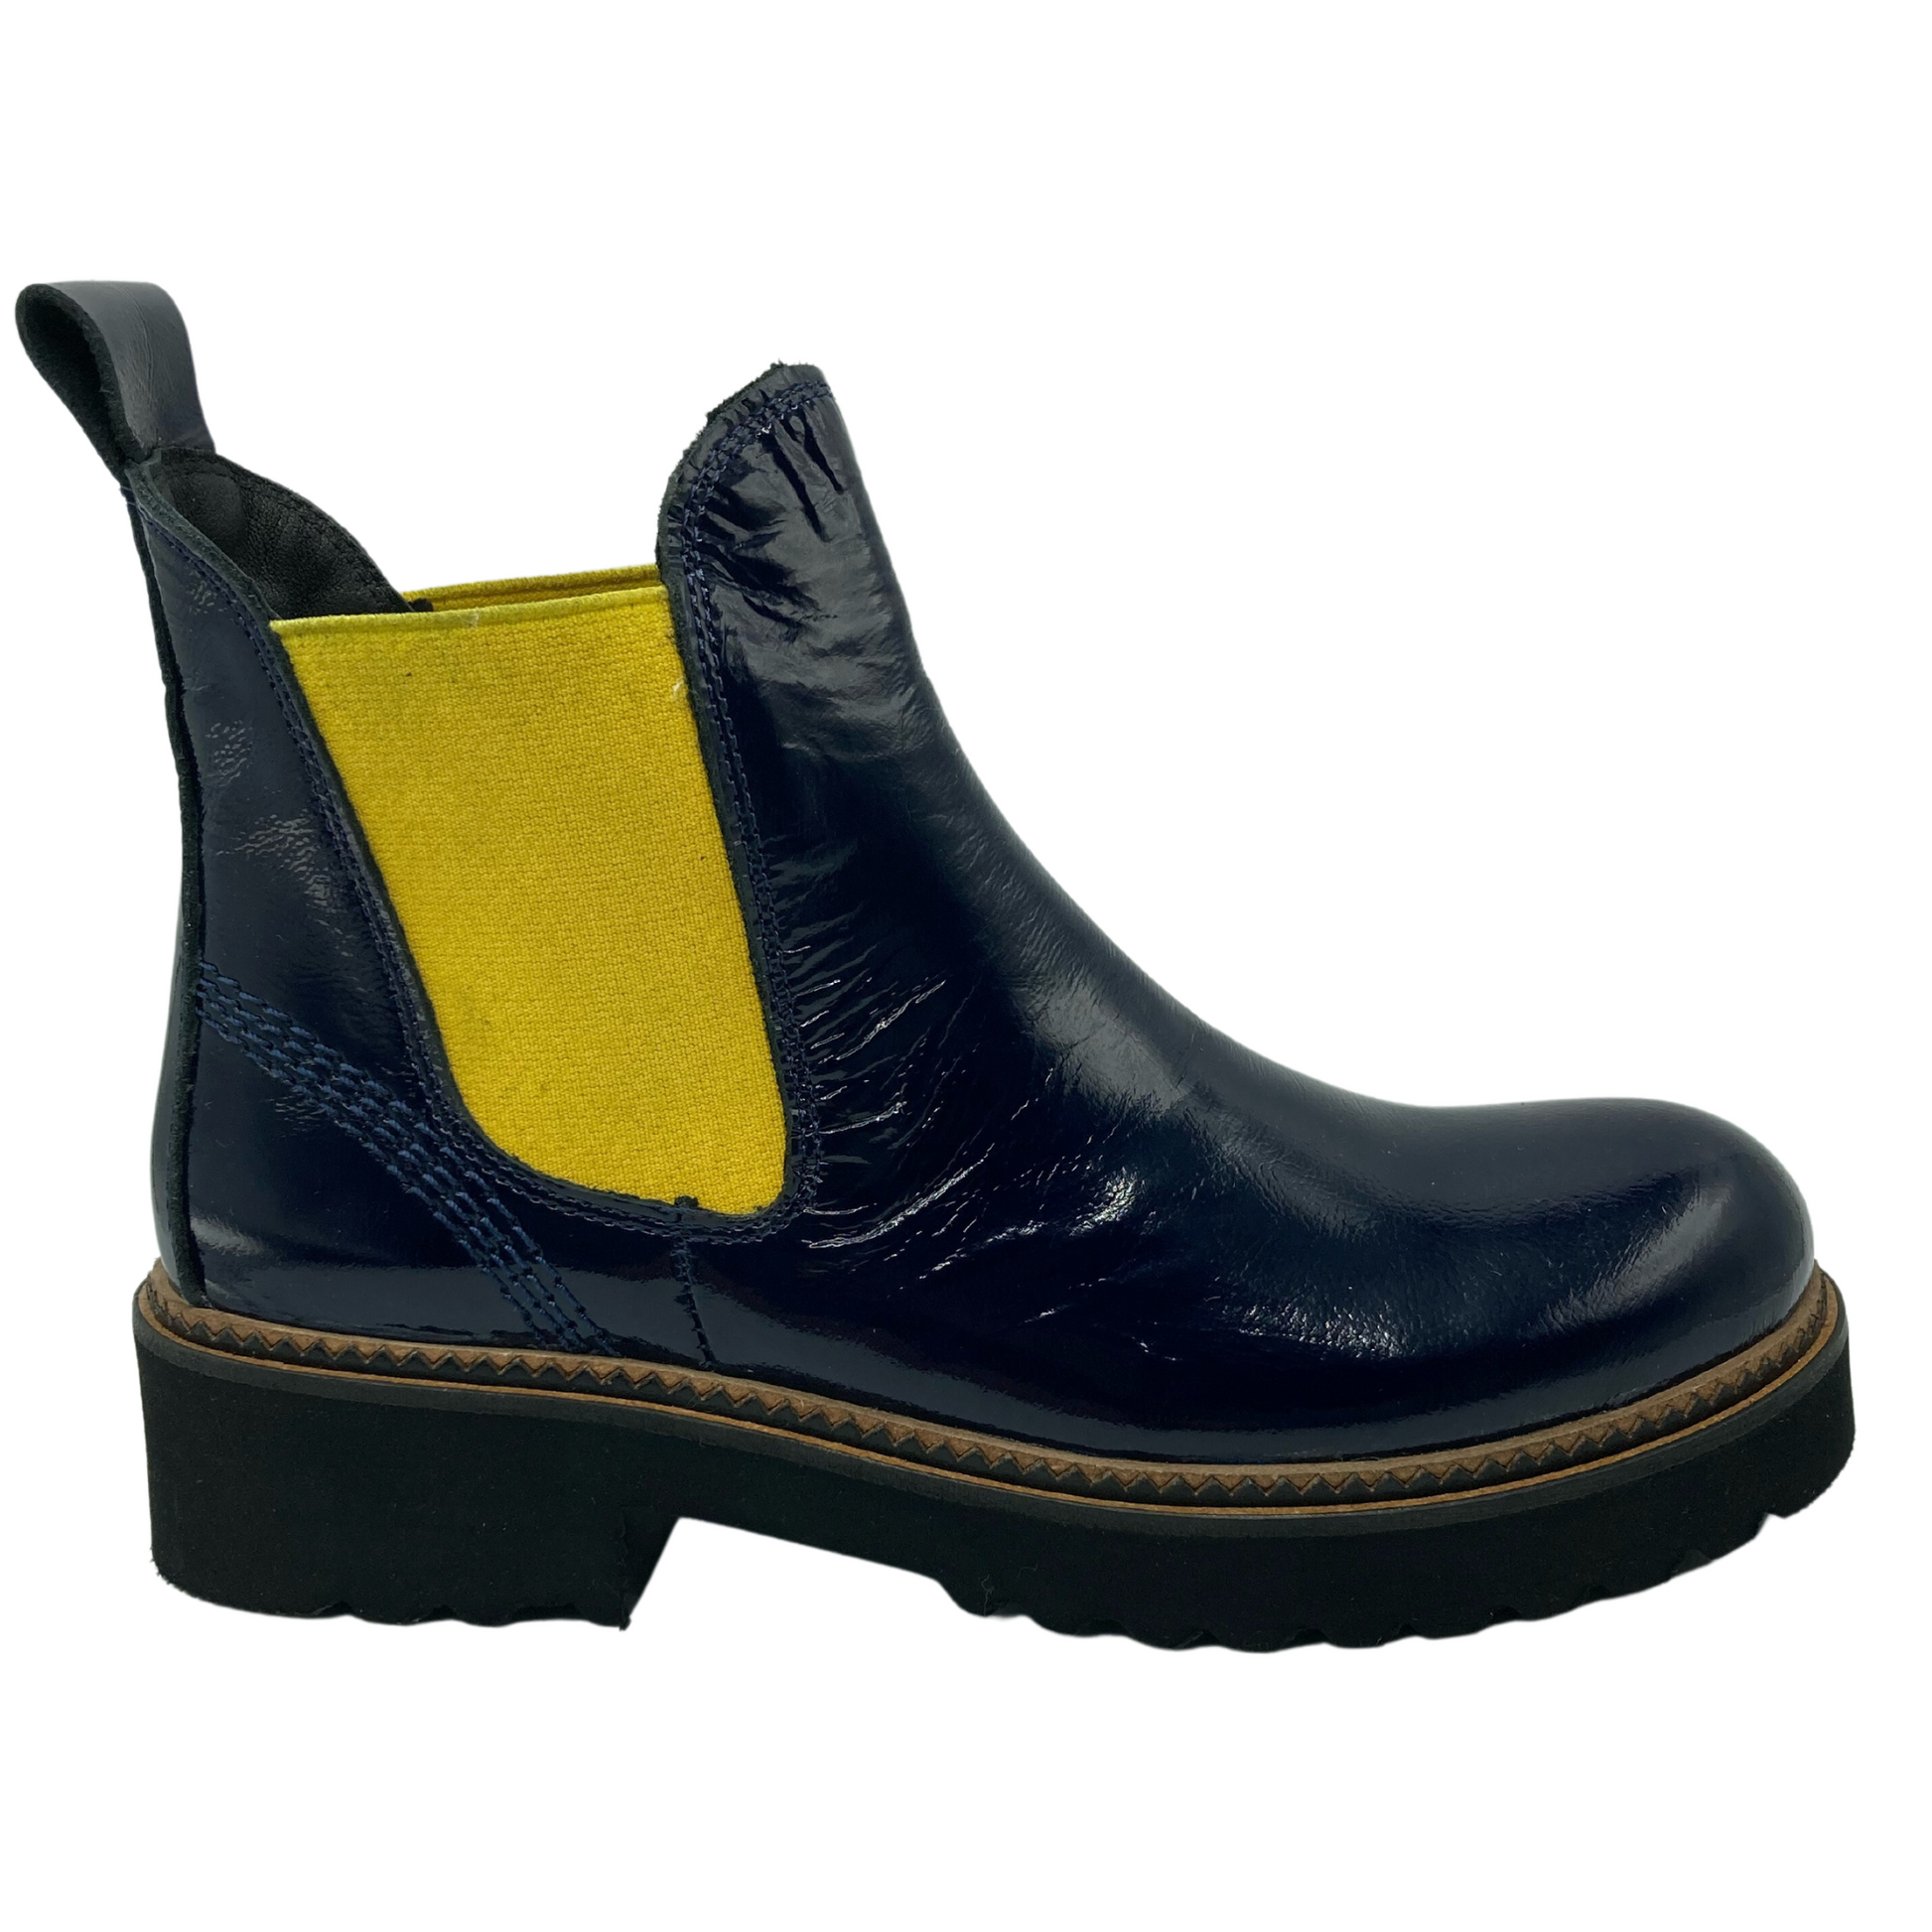 Right facing view of navy patent leather ankle boot with yellow elastic side gore and black lug sole